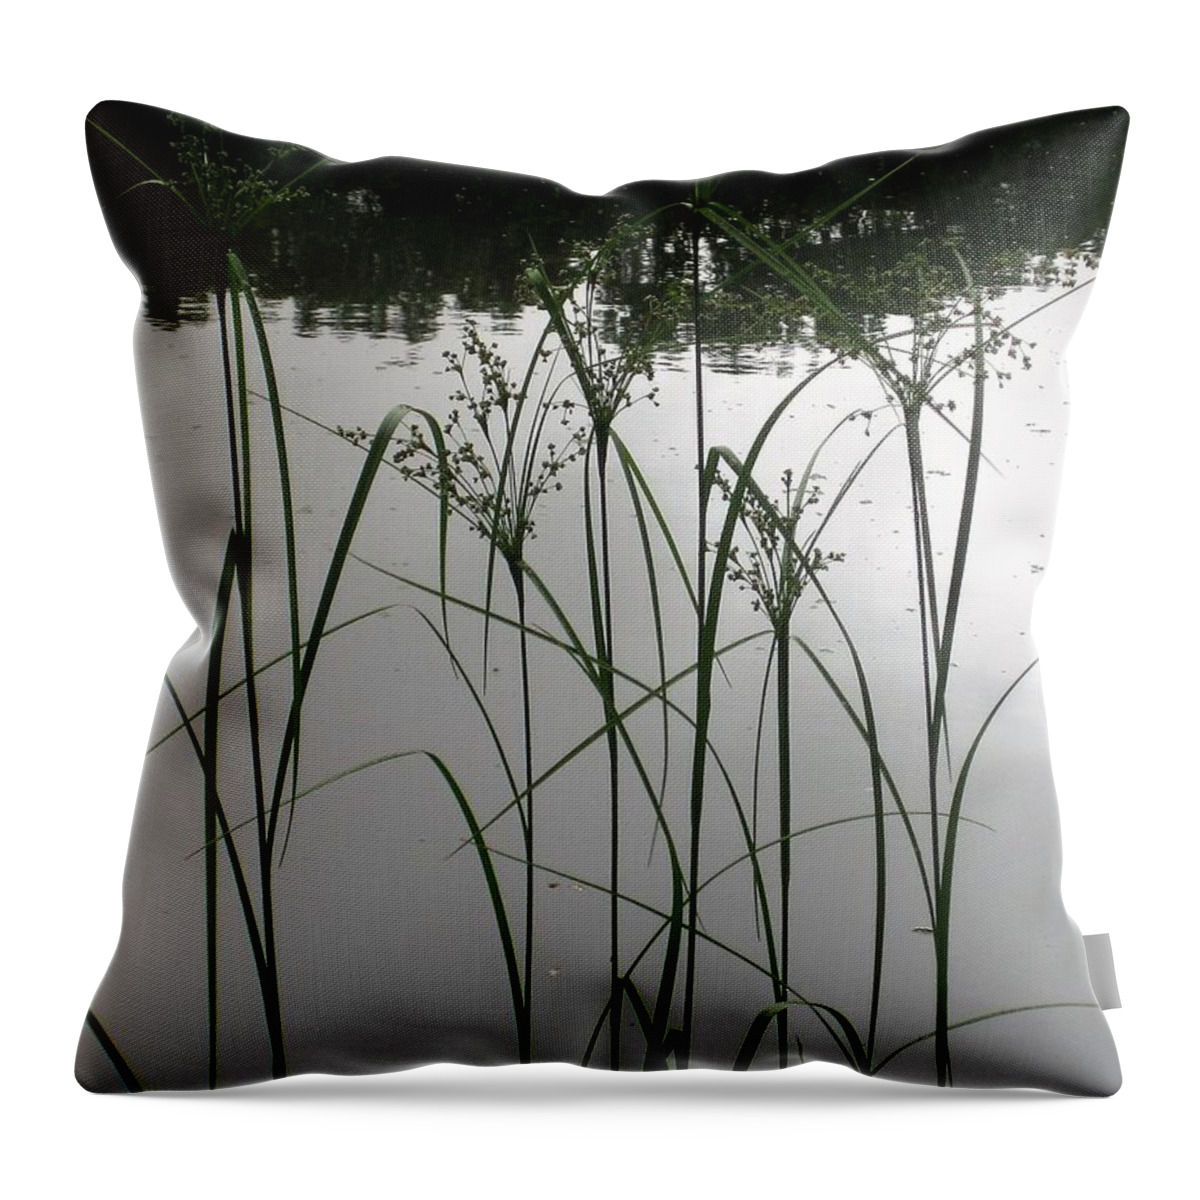 Photos By Paul Meinerth Throw Pillow featuring the photograph Simple Grass by Paul Meinerth